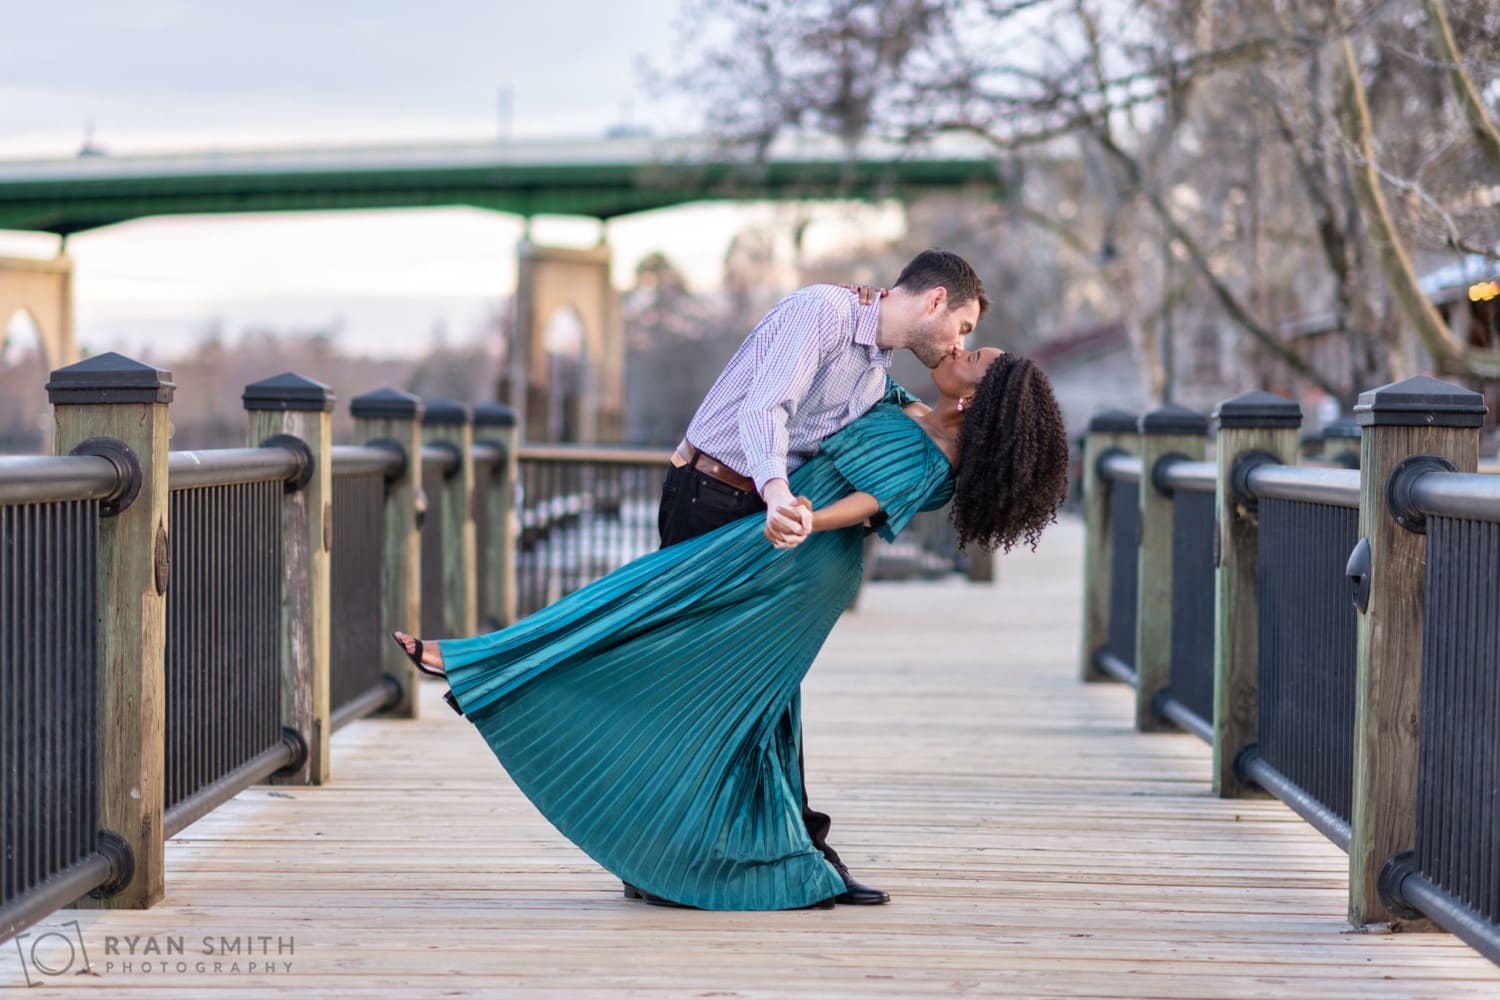 Dipping back wife back for a kiss on the boardwalk - Conway Riverwalk